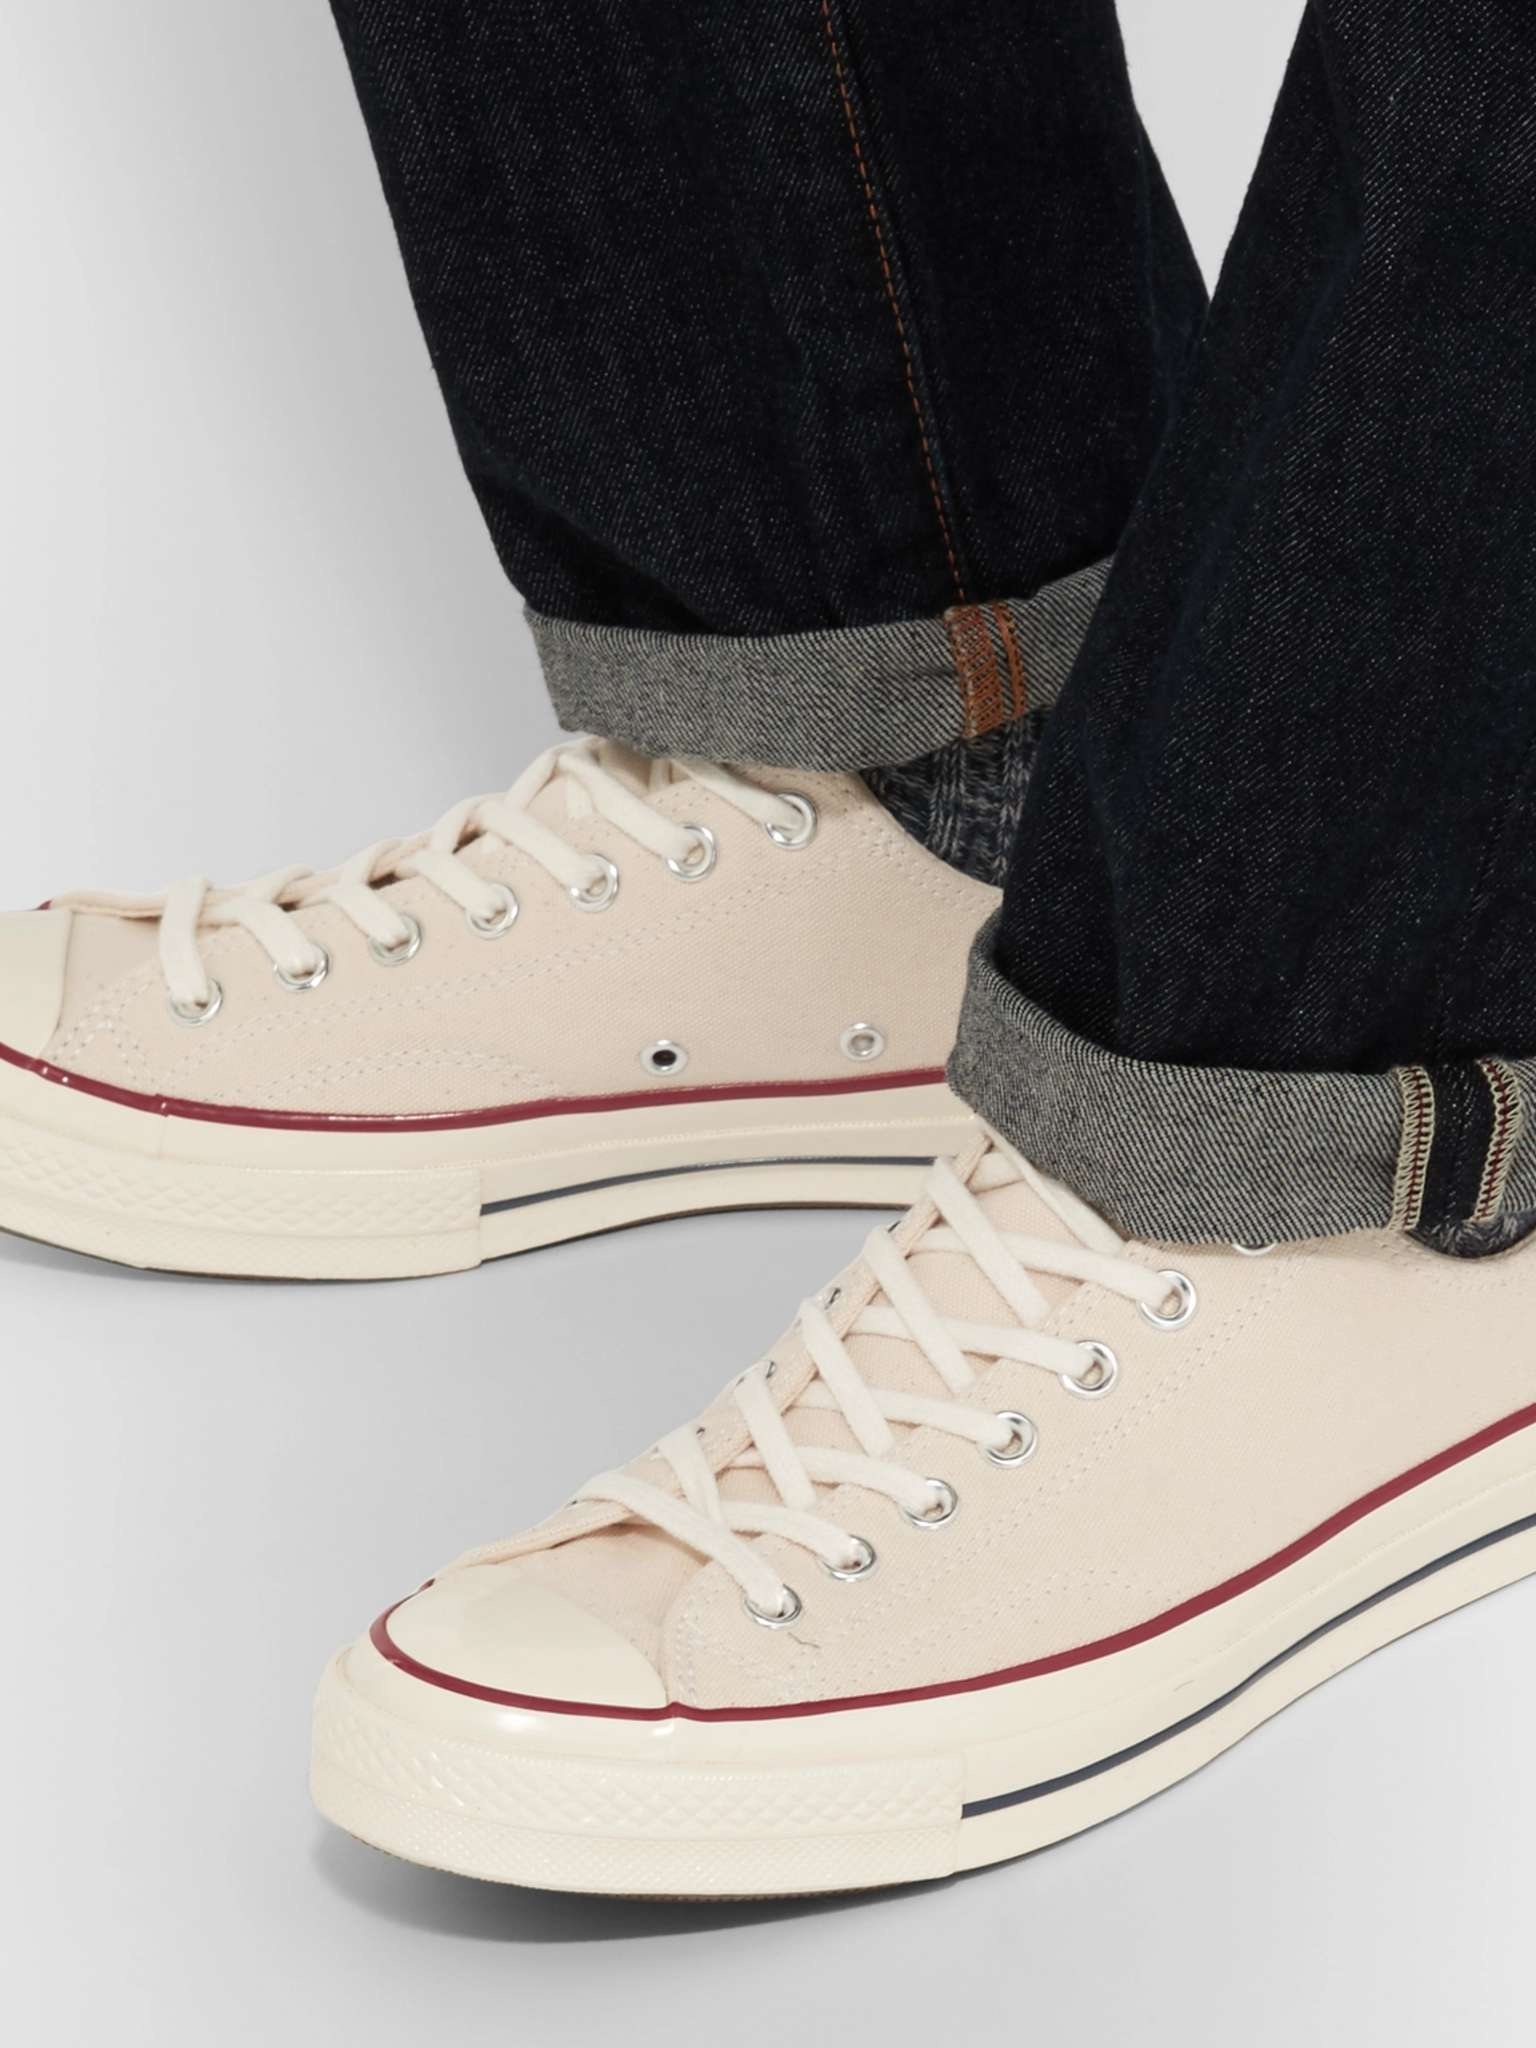 1970s Chuck Taylor All Star Canvas Sneakers - 3